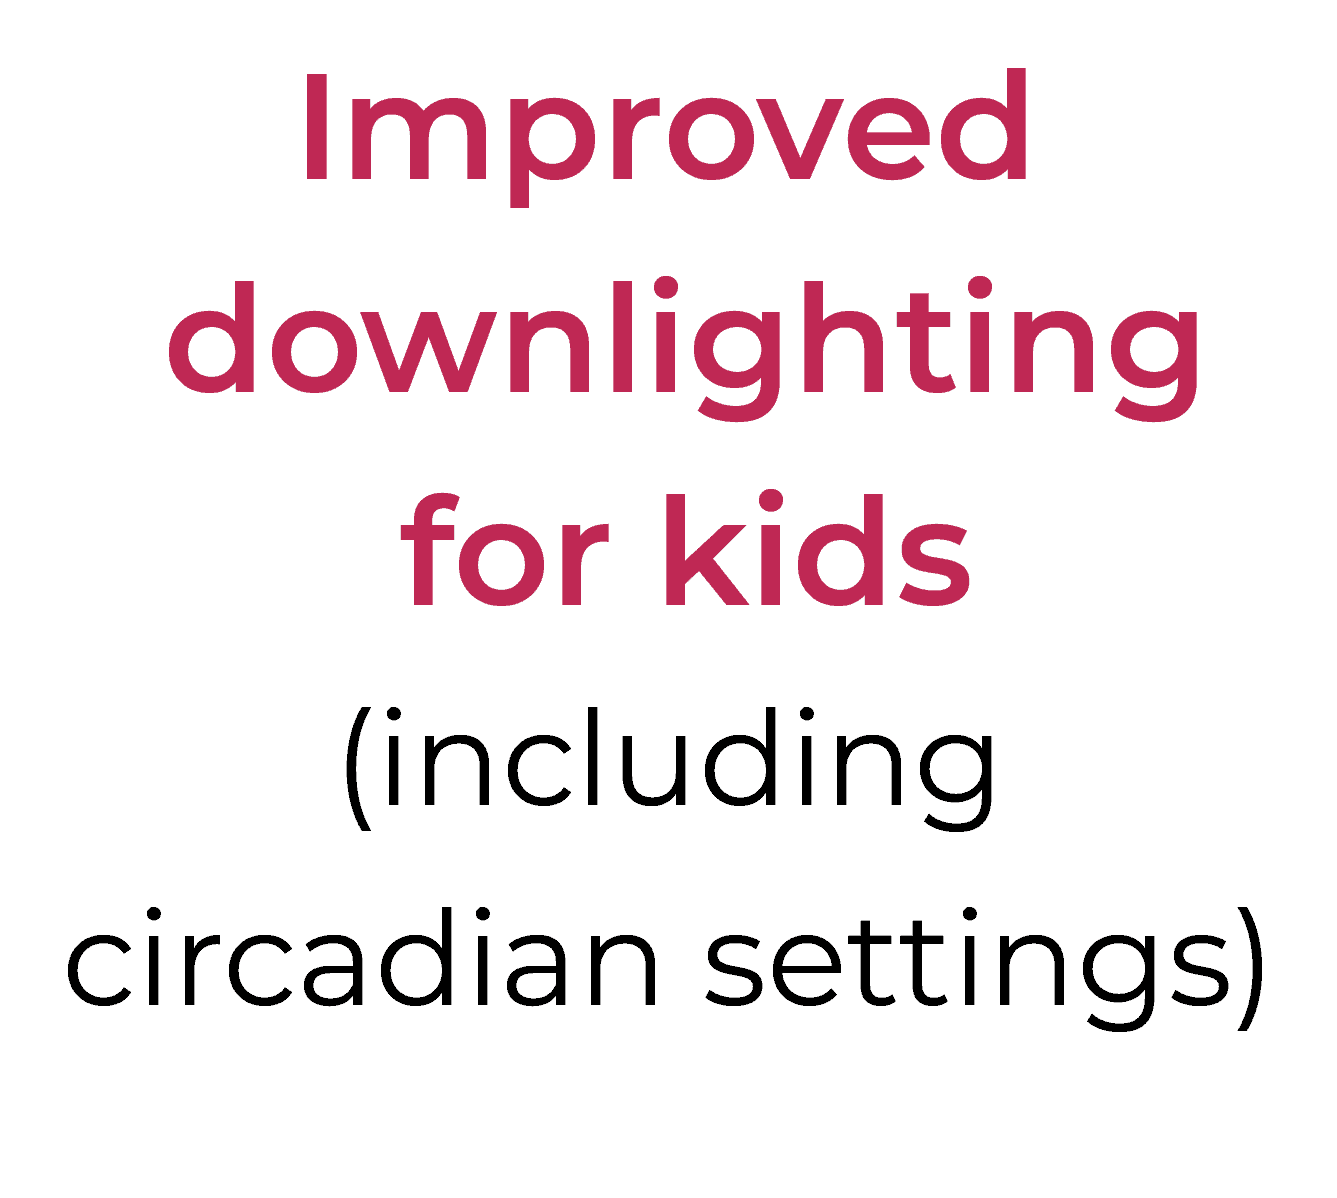 Text that reads "Improved downlighting for kids (including circadian settings)"